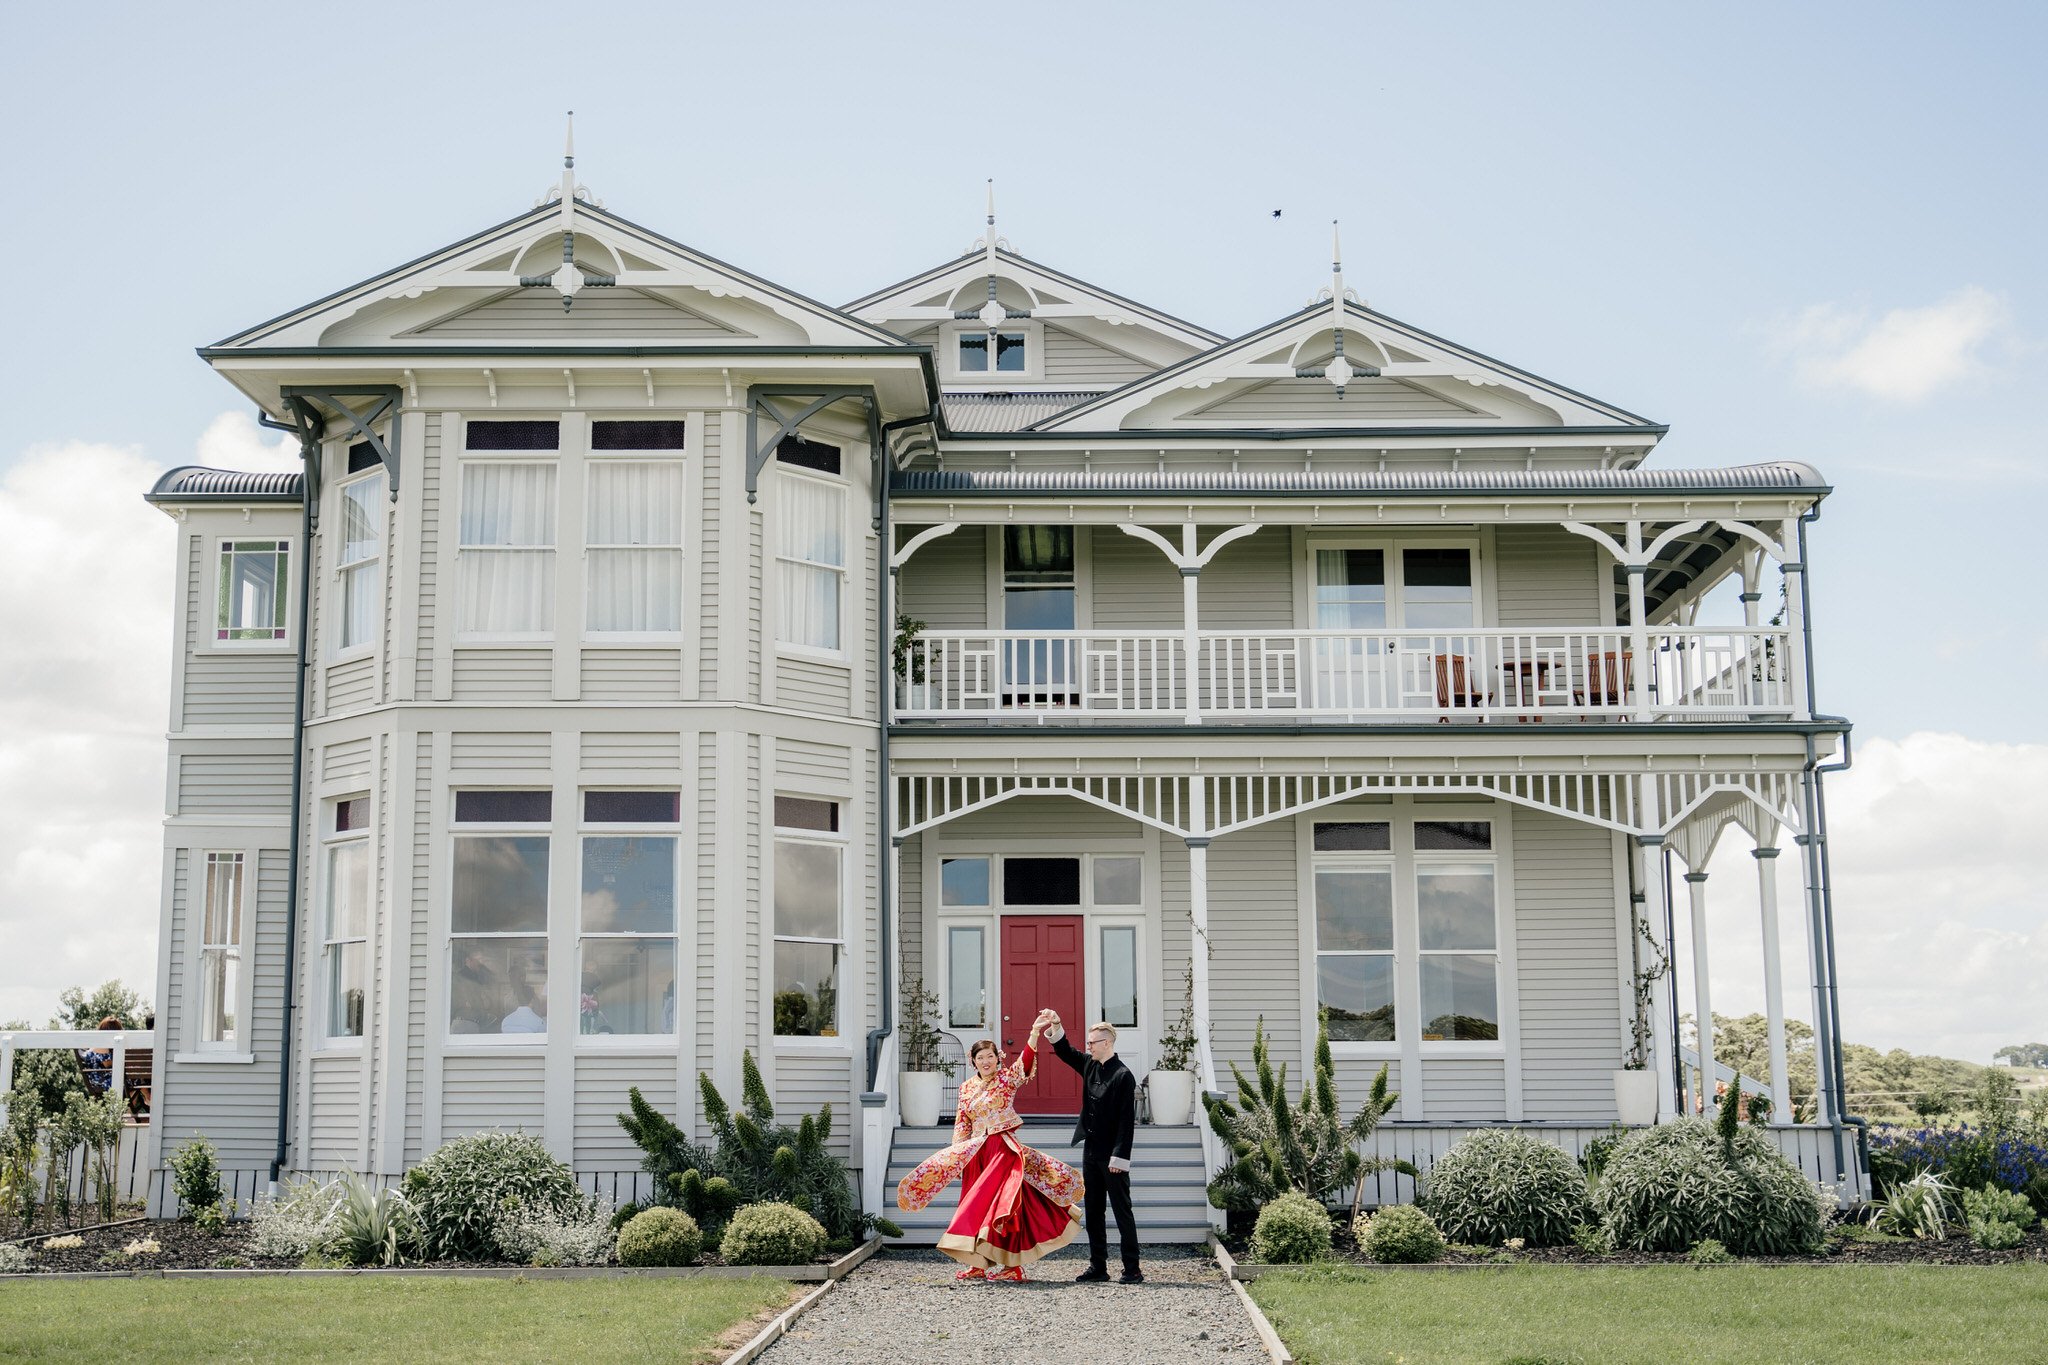 huntly-house-auckland-wedding-venue-mansion-vintage-luxury-accommodation-photographer-videography-dear-white-productions-photo-film-south-clarks-beach (33).jpg